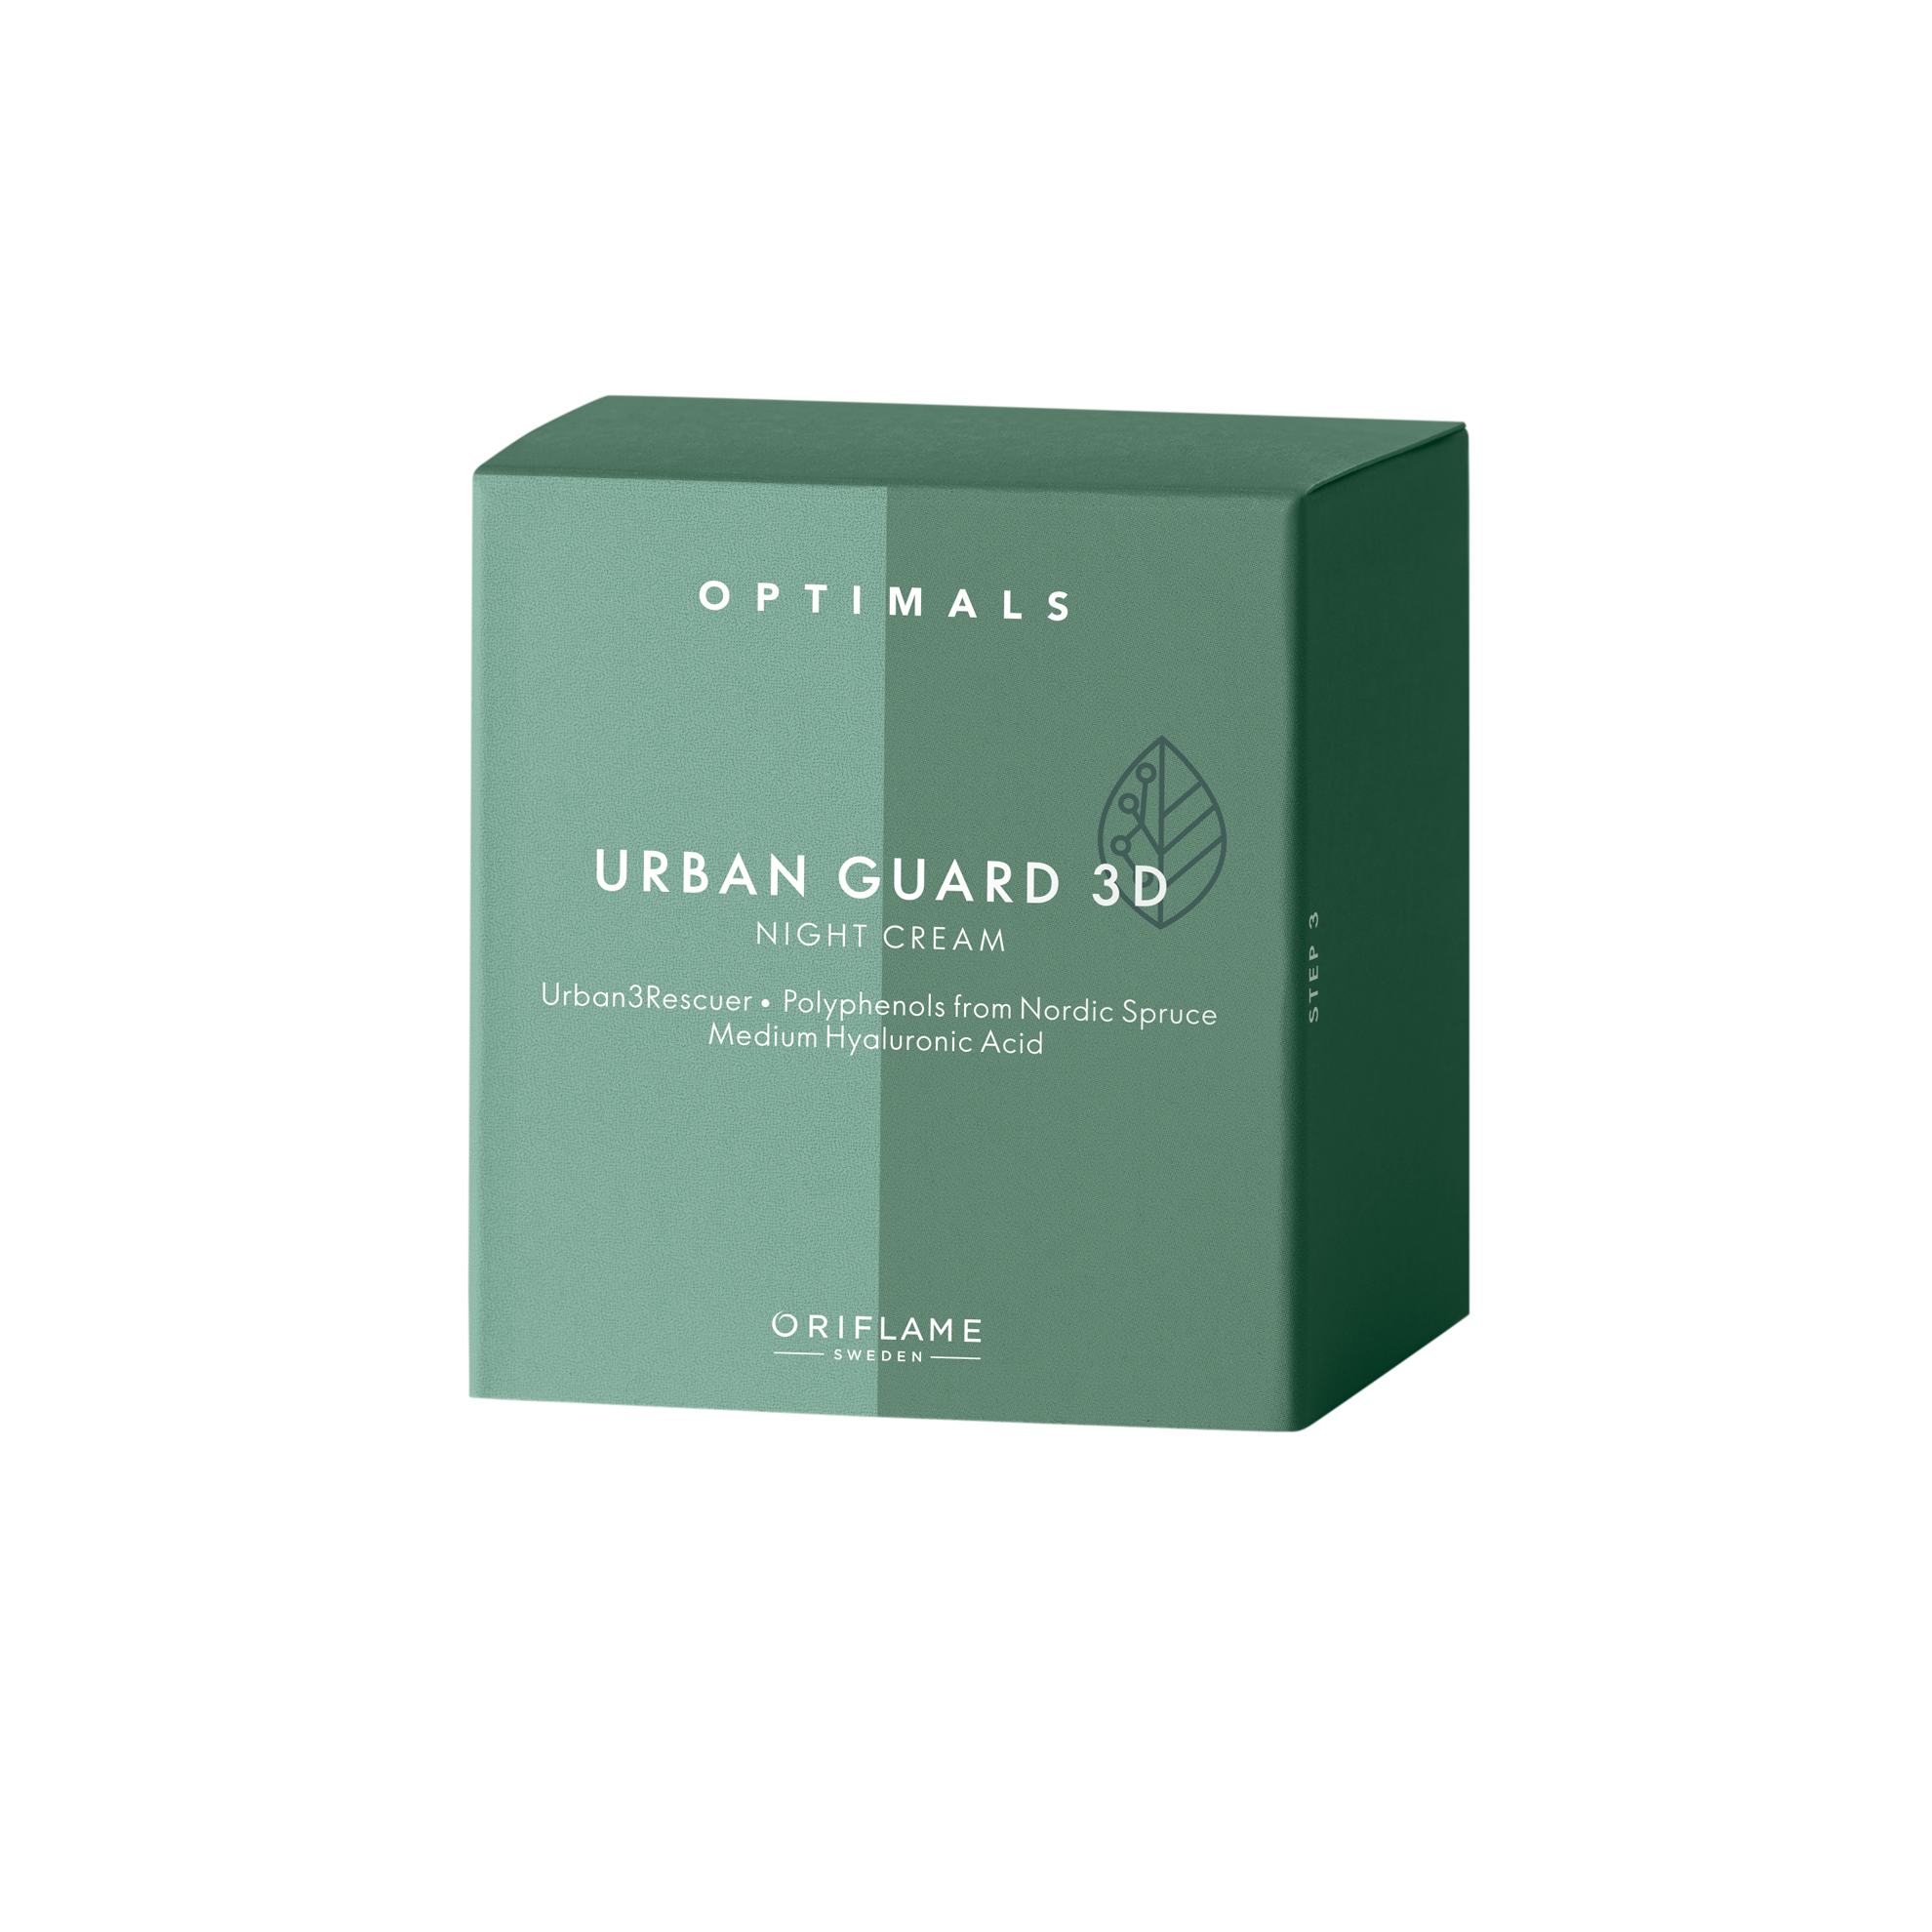 https://media-cdn.oriflame.com/productImage?externalMediaId=product-management-media%2fProducts%2f44260%2fRU%2f44260_1.png&id=15186919&version=1